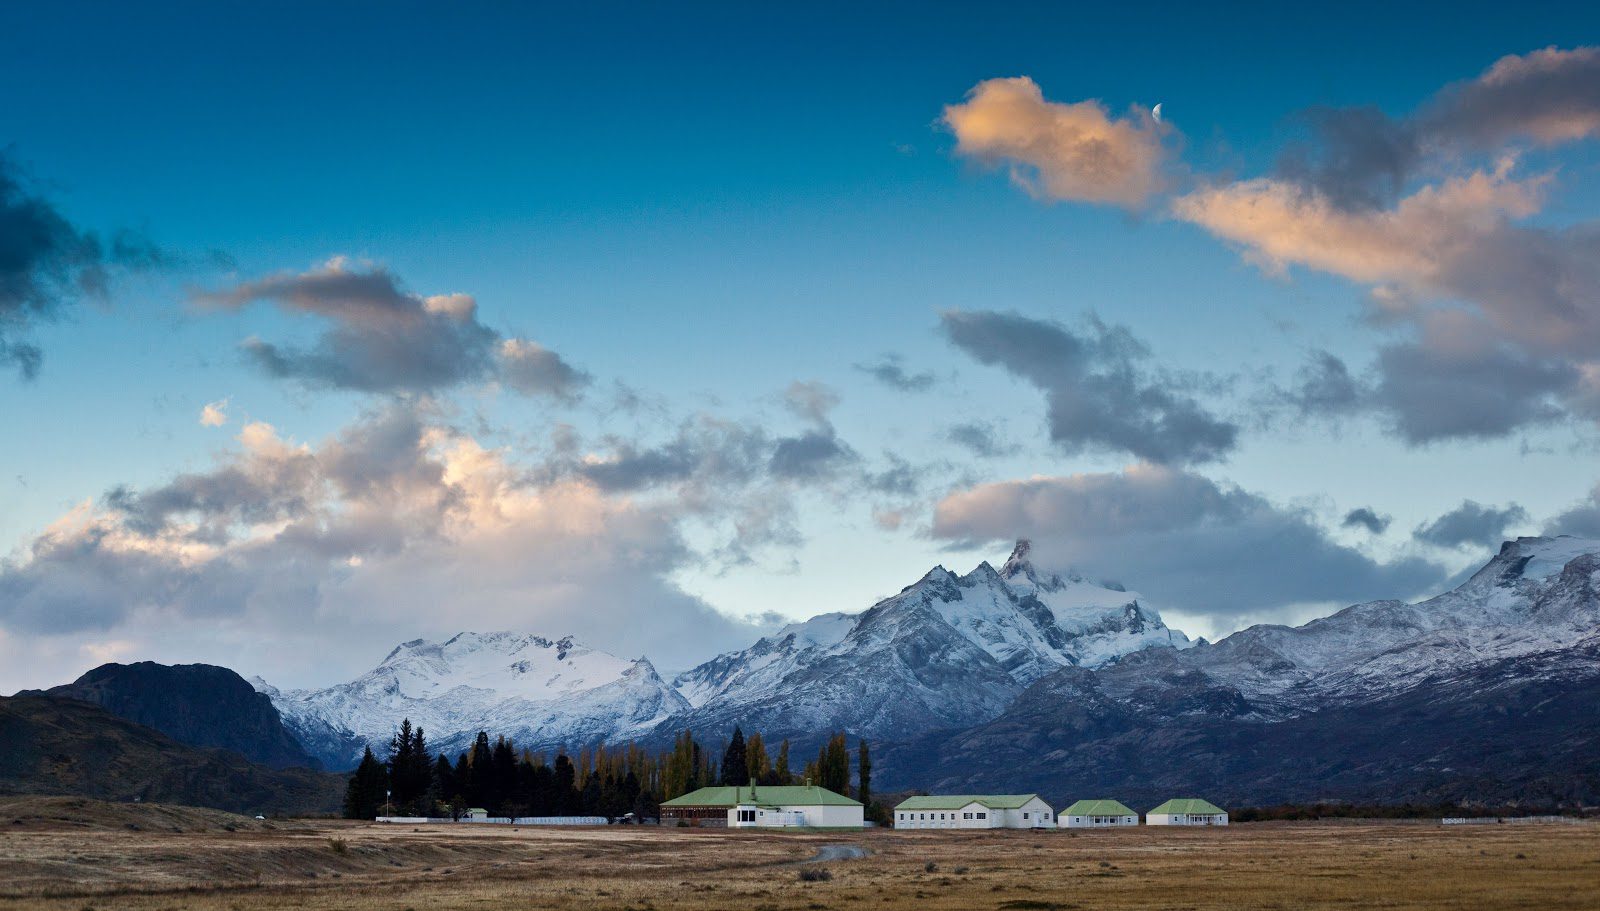 The 5 Best Luxury Patagonia Properties for Your Adventure, Amazing Sun Capped Mountains